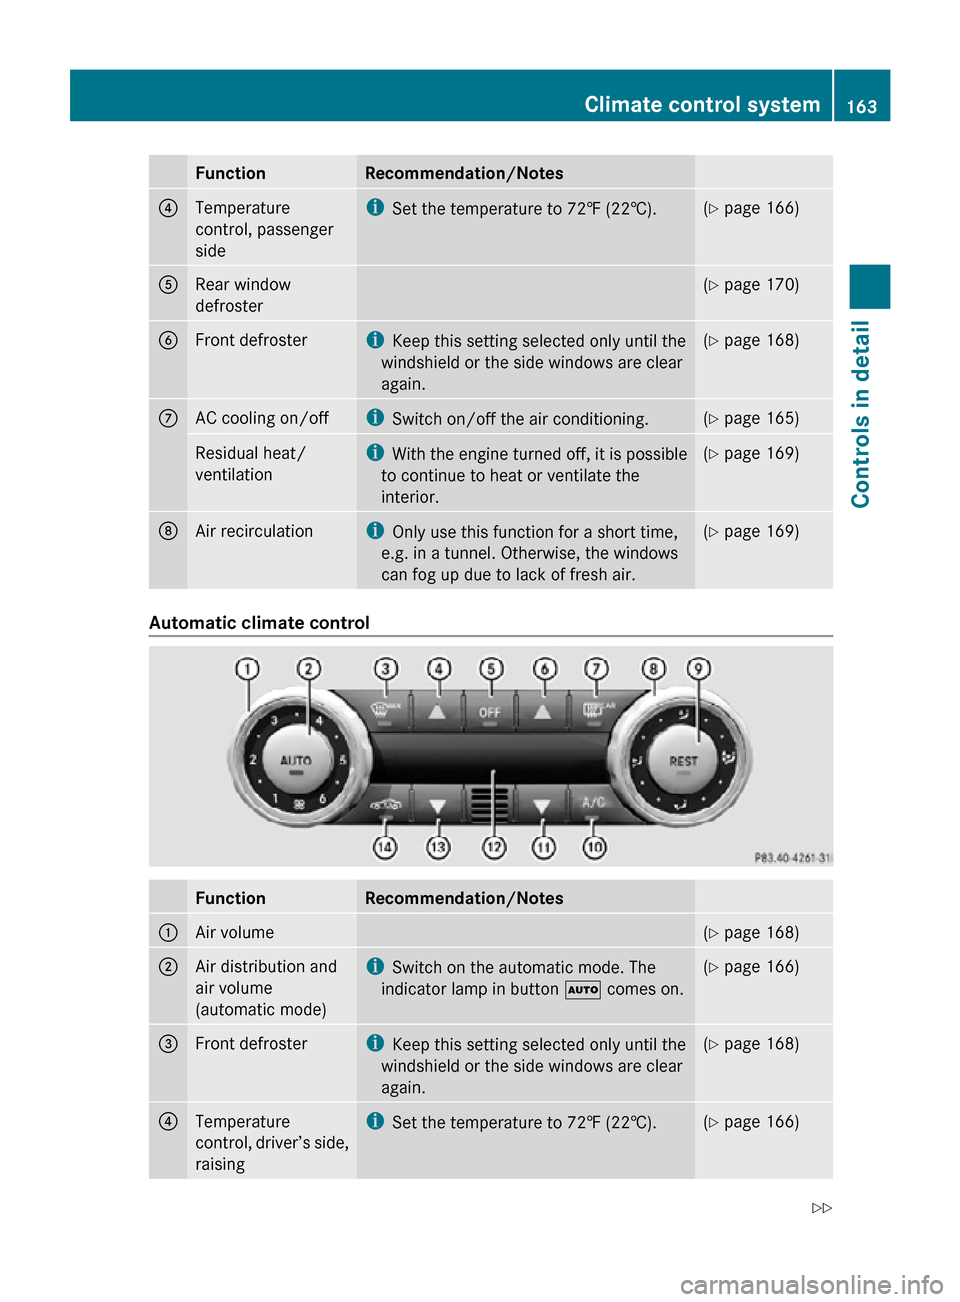 MERCEDES-BENZ SLK350 2010 R171 Owners Manual Function Recommendation/Notes
4
Temperature
control, passenger
side i
Set the temperature to 72‡ (22†). (Y page 166)
5
Rear window
defroster (Y page 170)
6
Front defroster i
Keep this setting sele